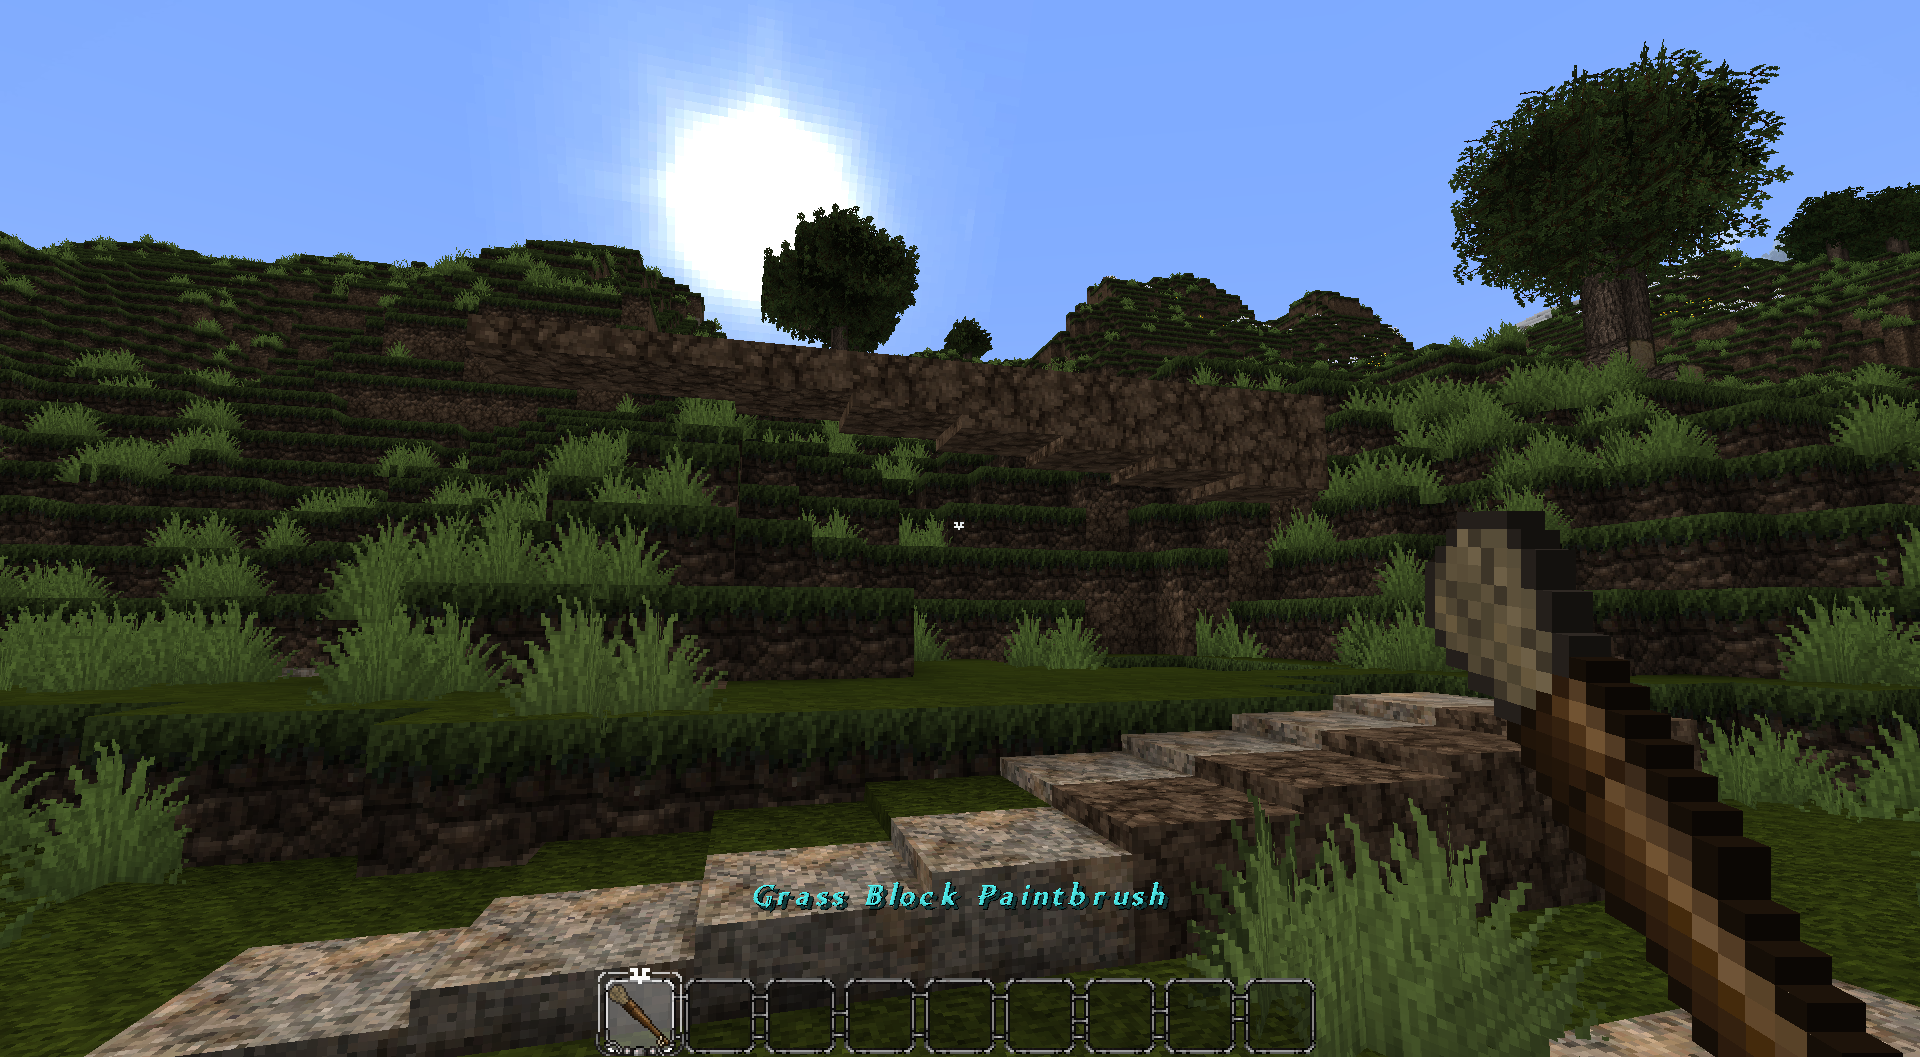 This screenshot shows a mix of grass, dirt, and limestone layer blocks from conquest reforged that can have their materials interchanged using this paintbrush.